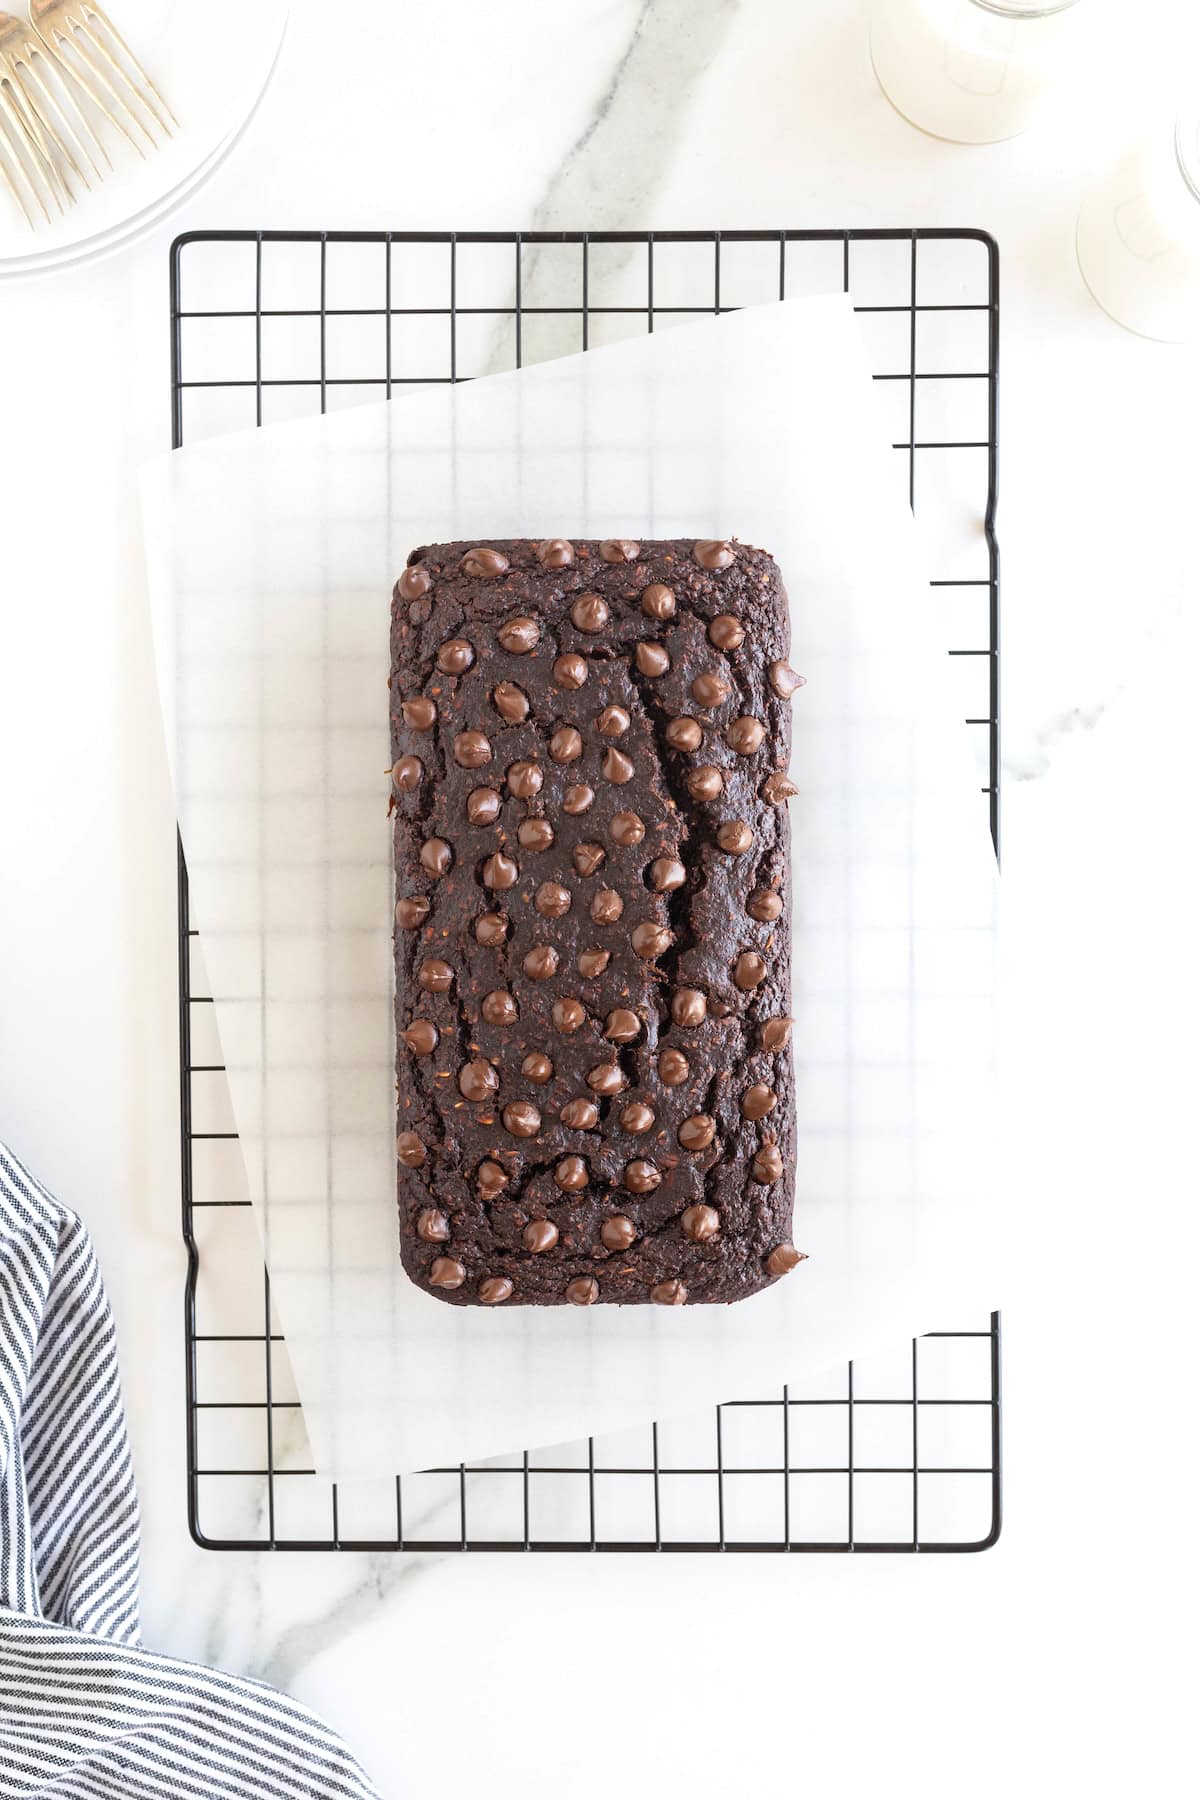 A loaf of chocolate banana bread on a parchment lined wire cooling rack.